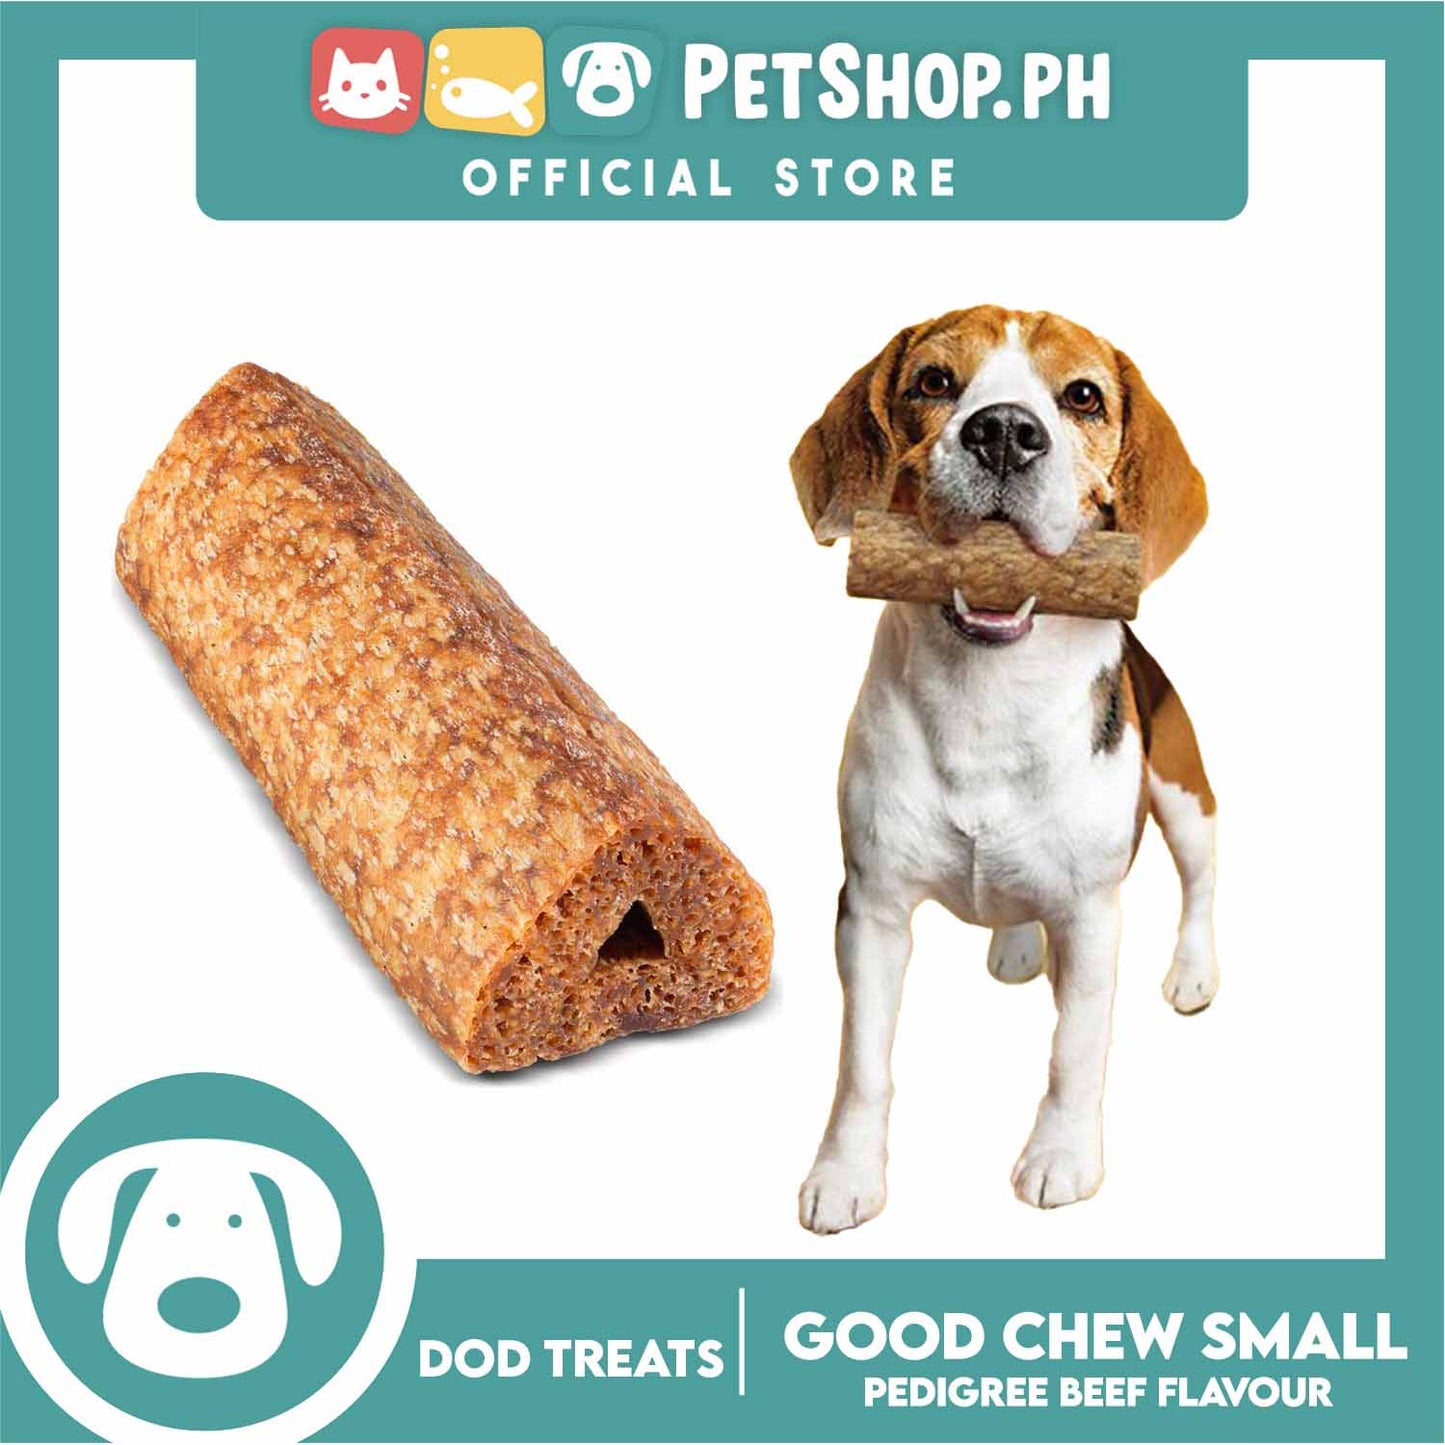 Pedigree Good Chew For Small Dogs 5-10kg (Beef Flavor) Easily Digestible, Tooth Friendly, Deliciously Long Lasting Chew, Rawhide Free, Dog Chews, Dental Treats